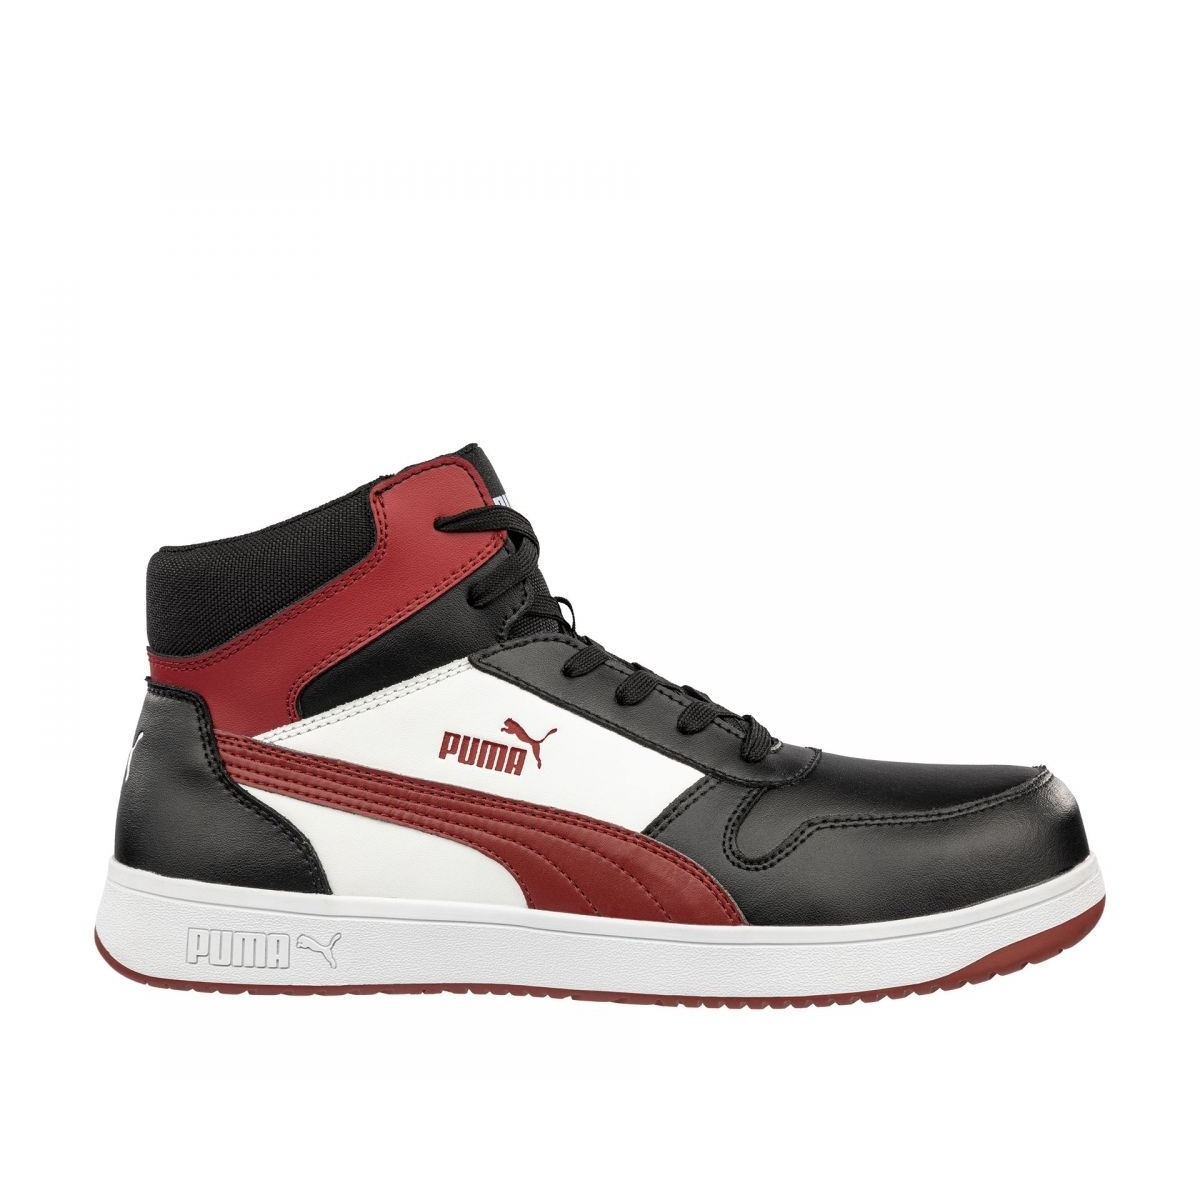 PUMA Safety Men's Frontcourt Mid Composite Toe Waterproof Work Boot Black/White/Red - 630055 BLK/ WHT/RED - BLK/ WHT/RED, 11